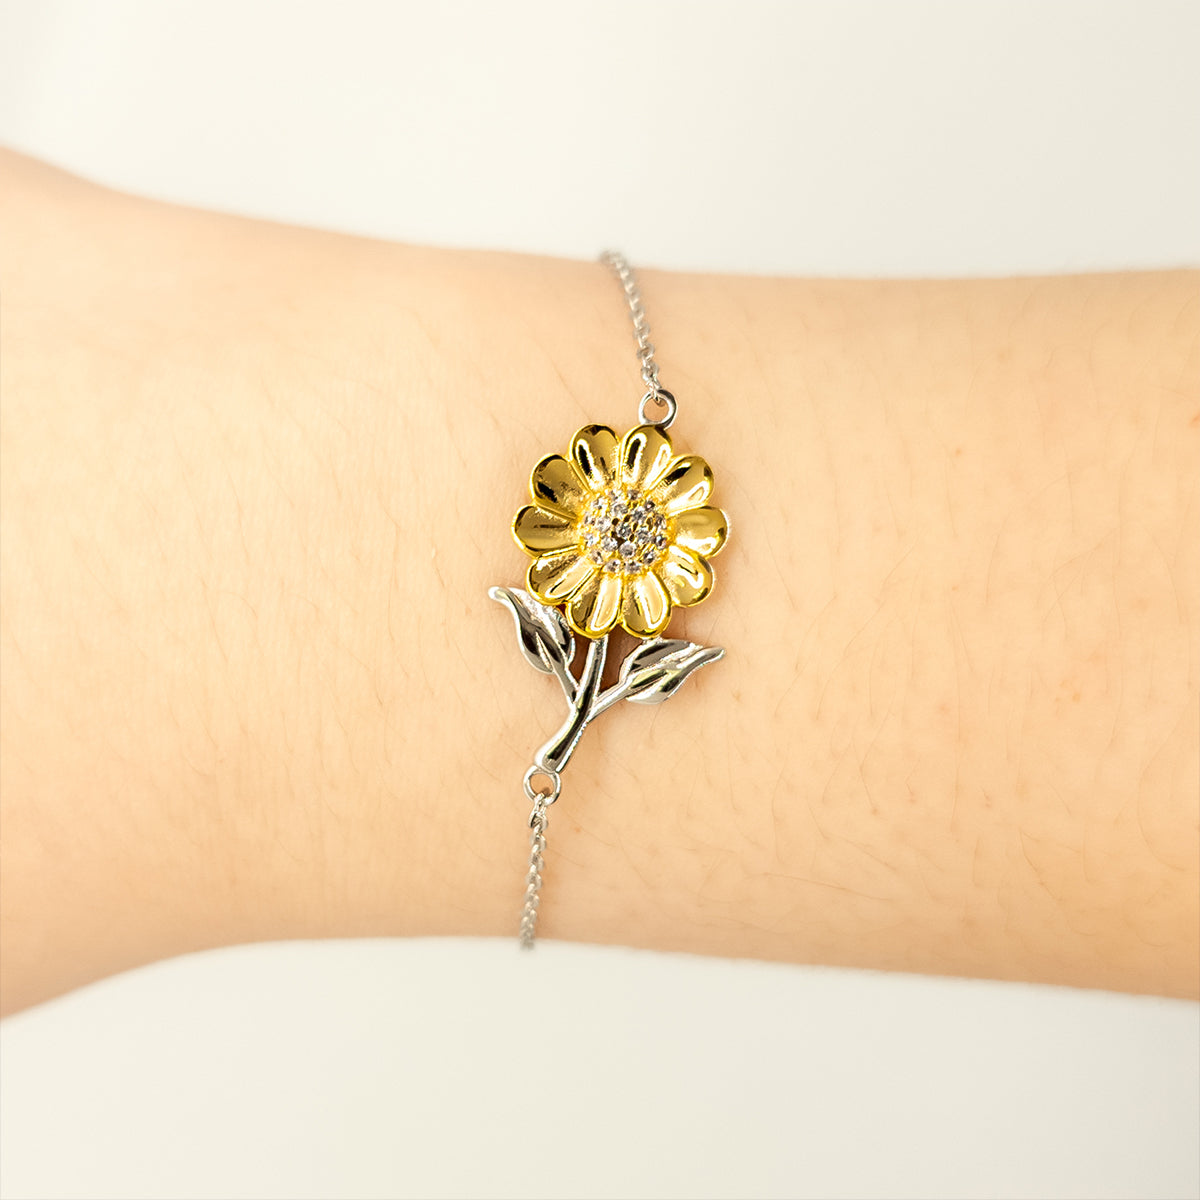 To My Amazing Granddaughter Supporting Sunflower Bracelet, Life is an adventure waiting to be explored, Birthday Unique Gifts for Granddaughter from Grandfather